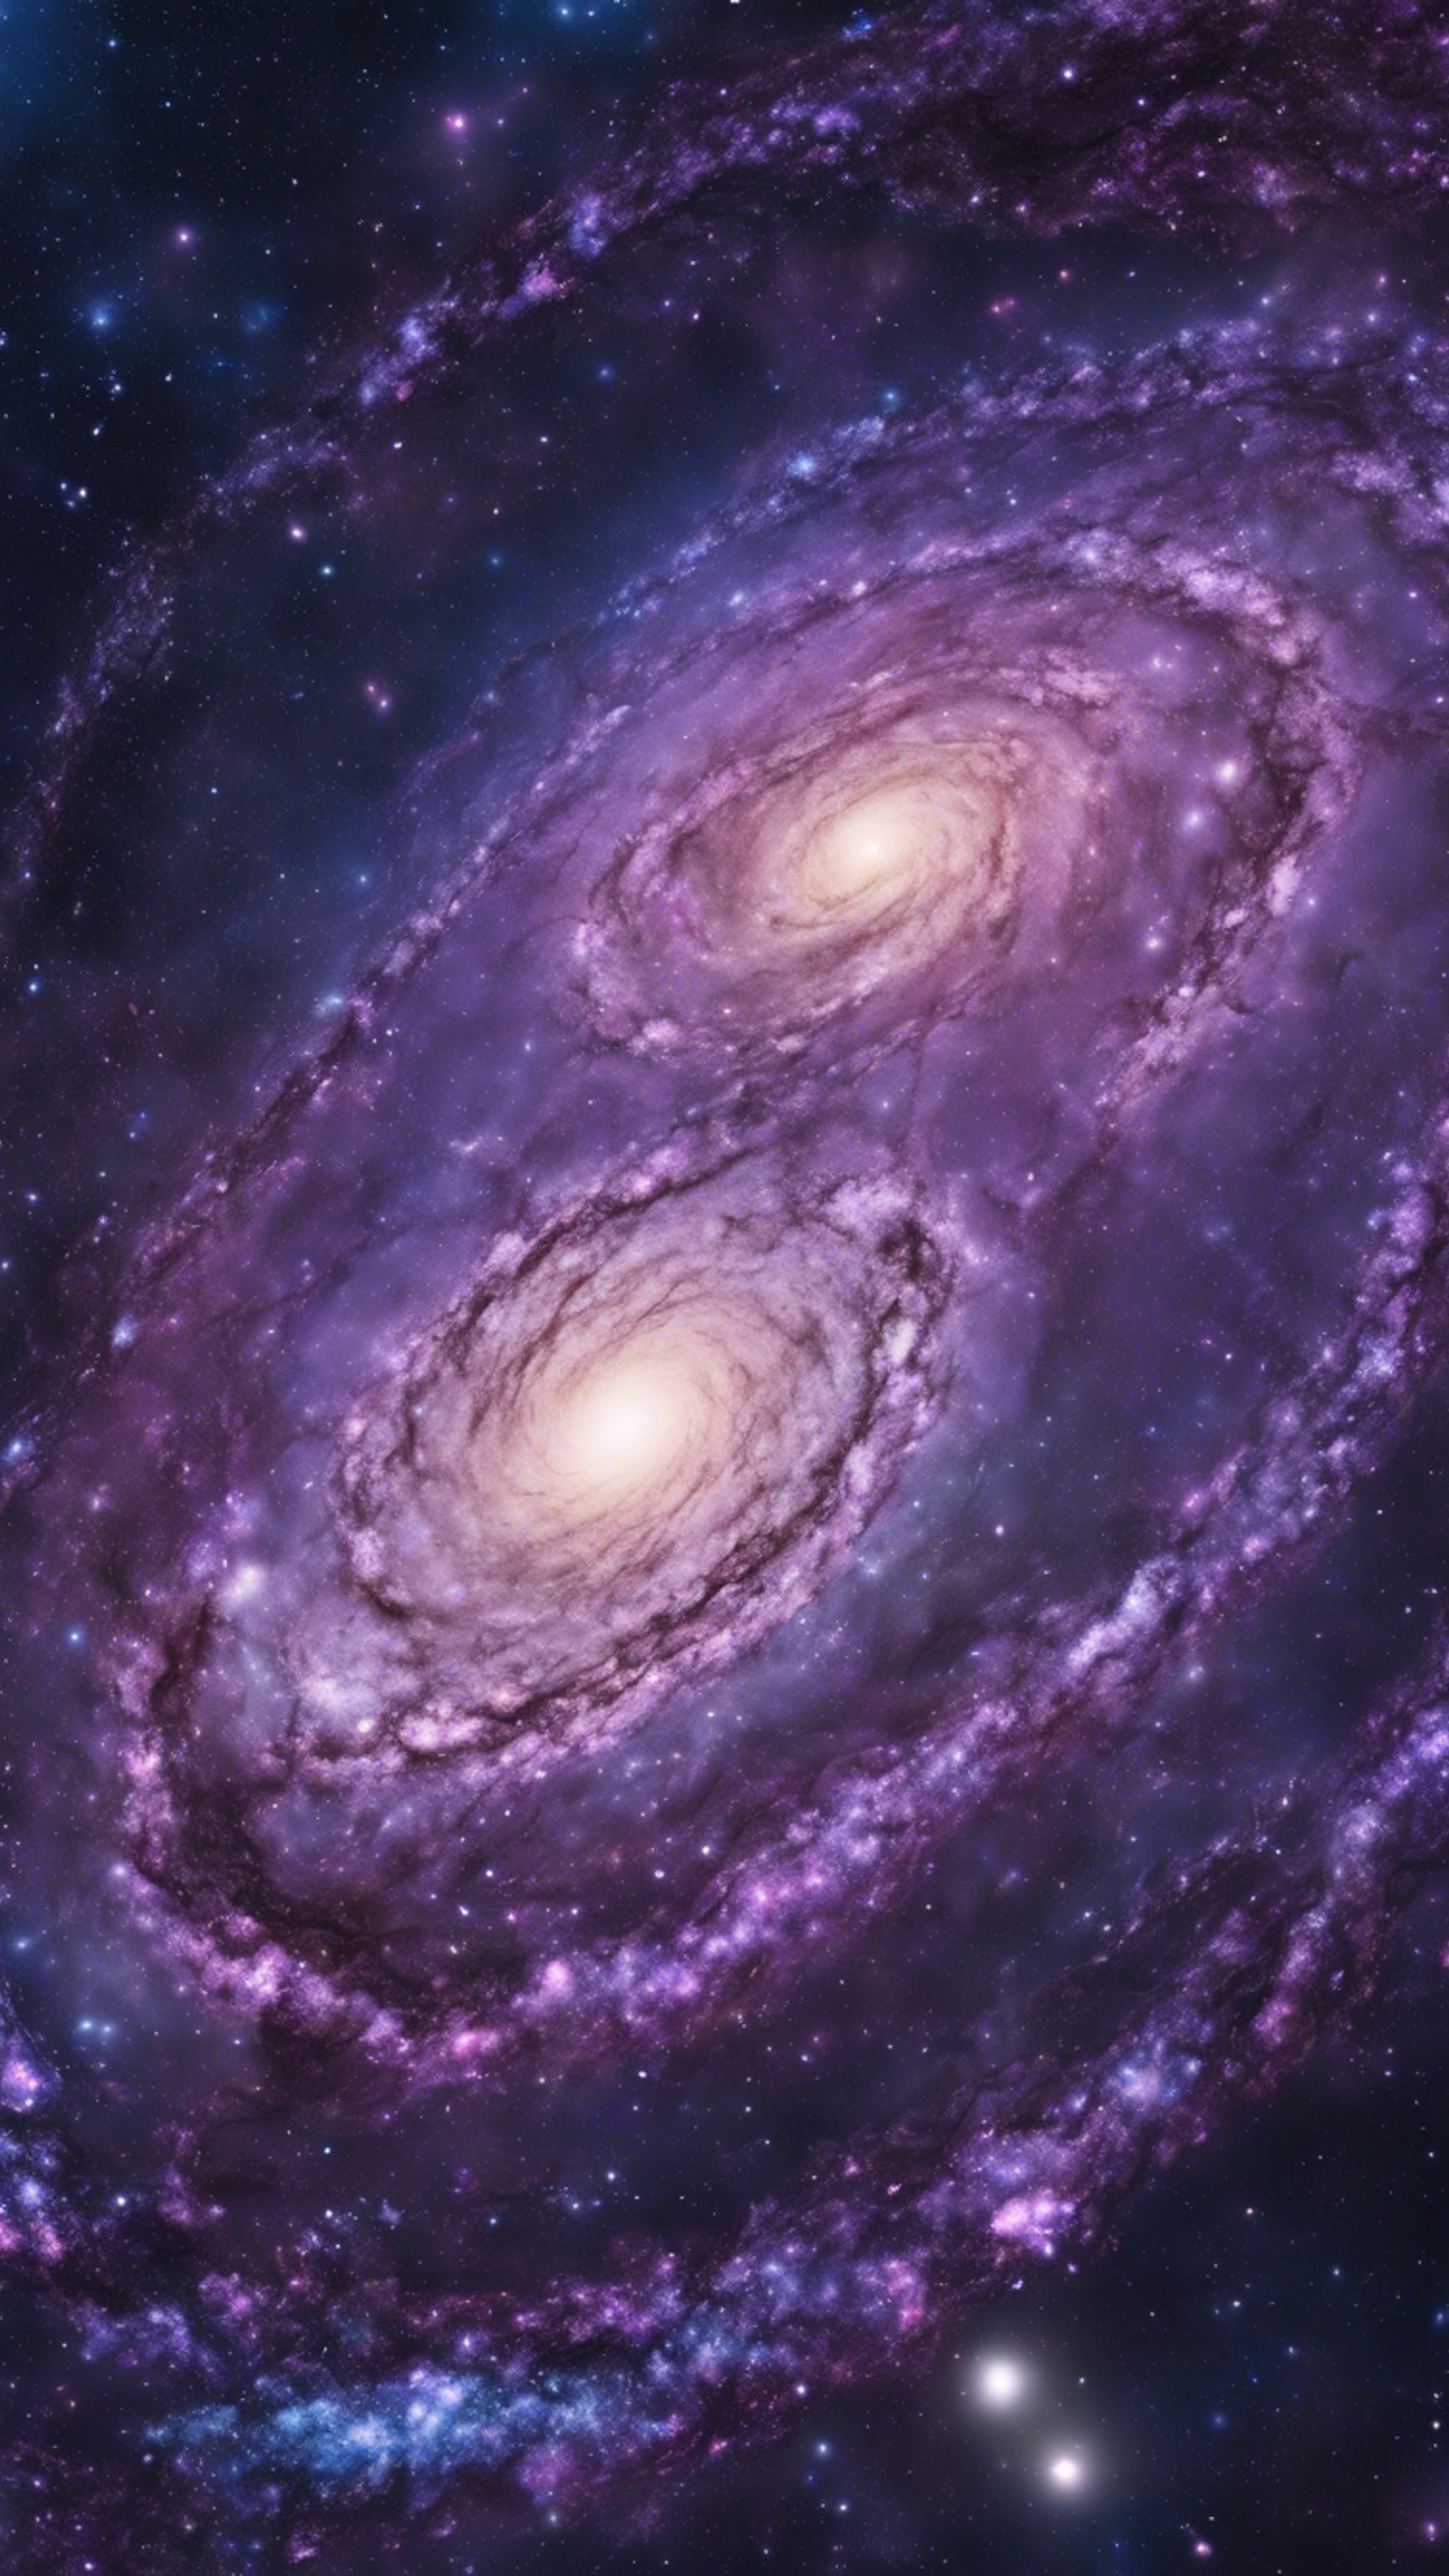 A spectacular galaxy with swirling patterns of purples and blues. Behang[e57f5ee32b94469cbfb9]